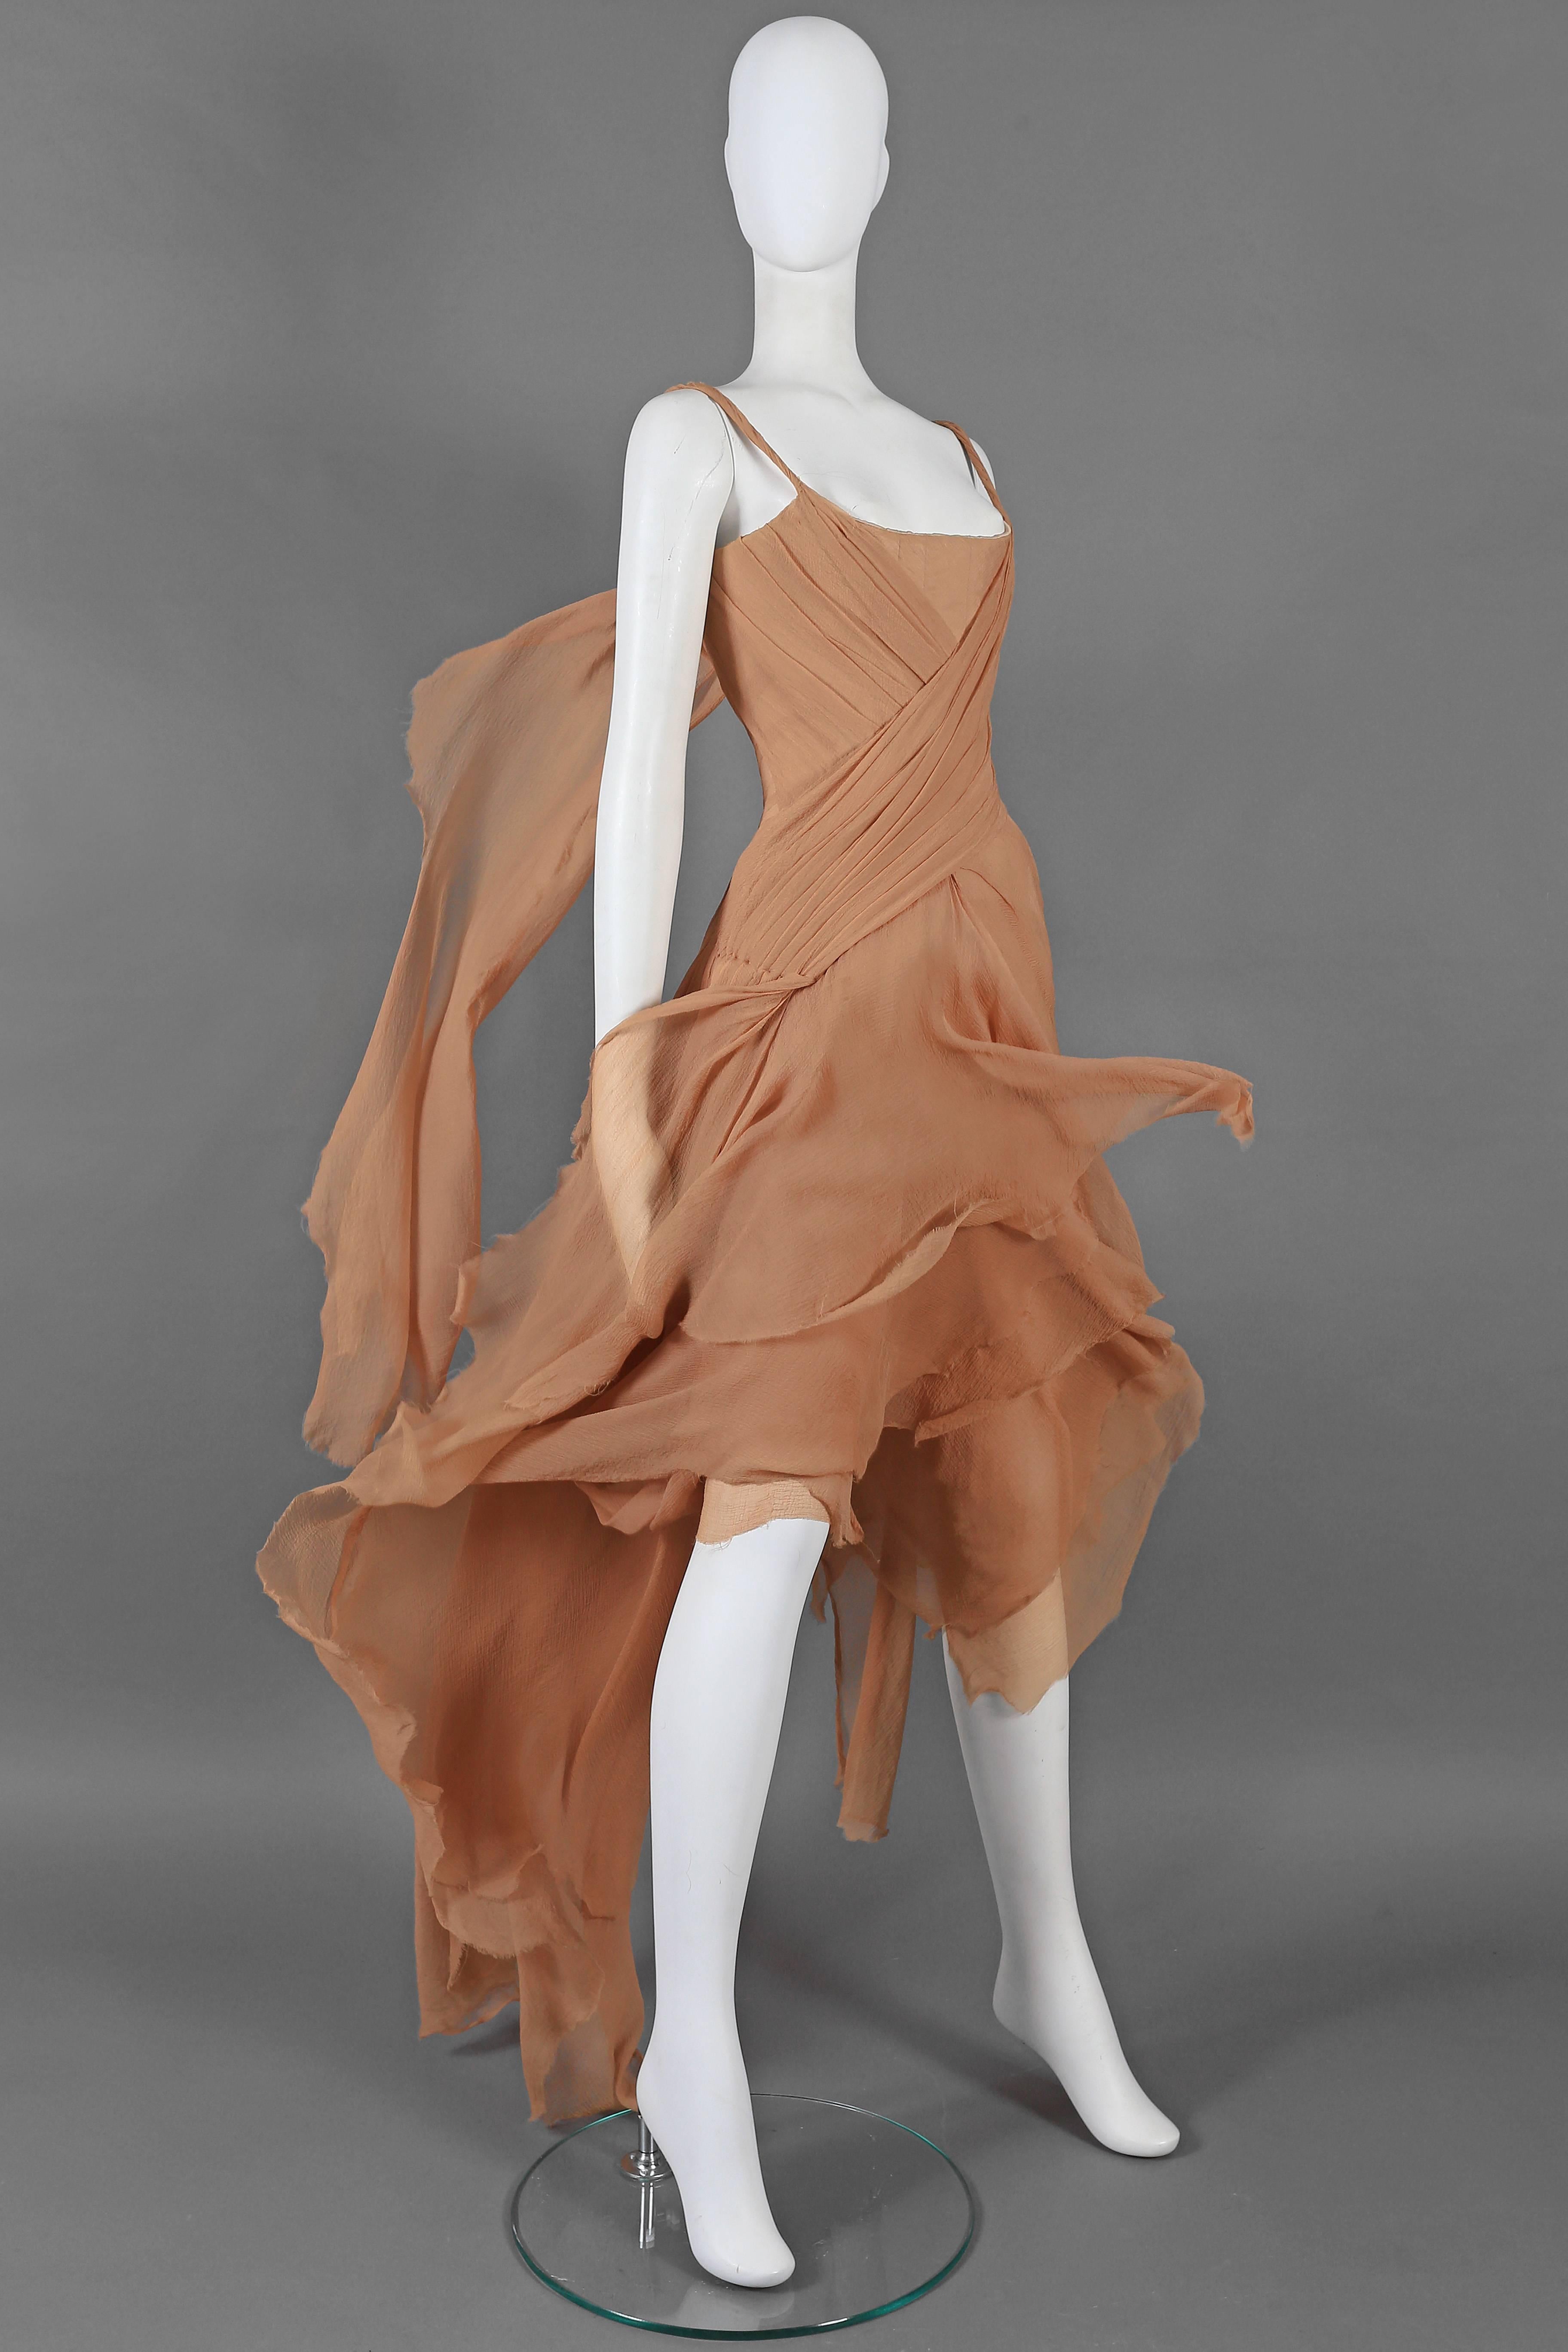 Exquisite and rare Alexander McQueen nude silk chiffon evening gown for the 'Irere' Spring-Summer 2003 collection. The dresses features a corsetted inner bodice covered with cross-over swathes of chiffon, floating panels with ragged edges to the